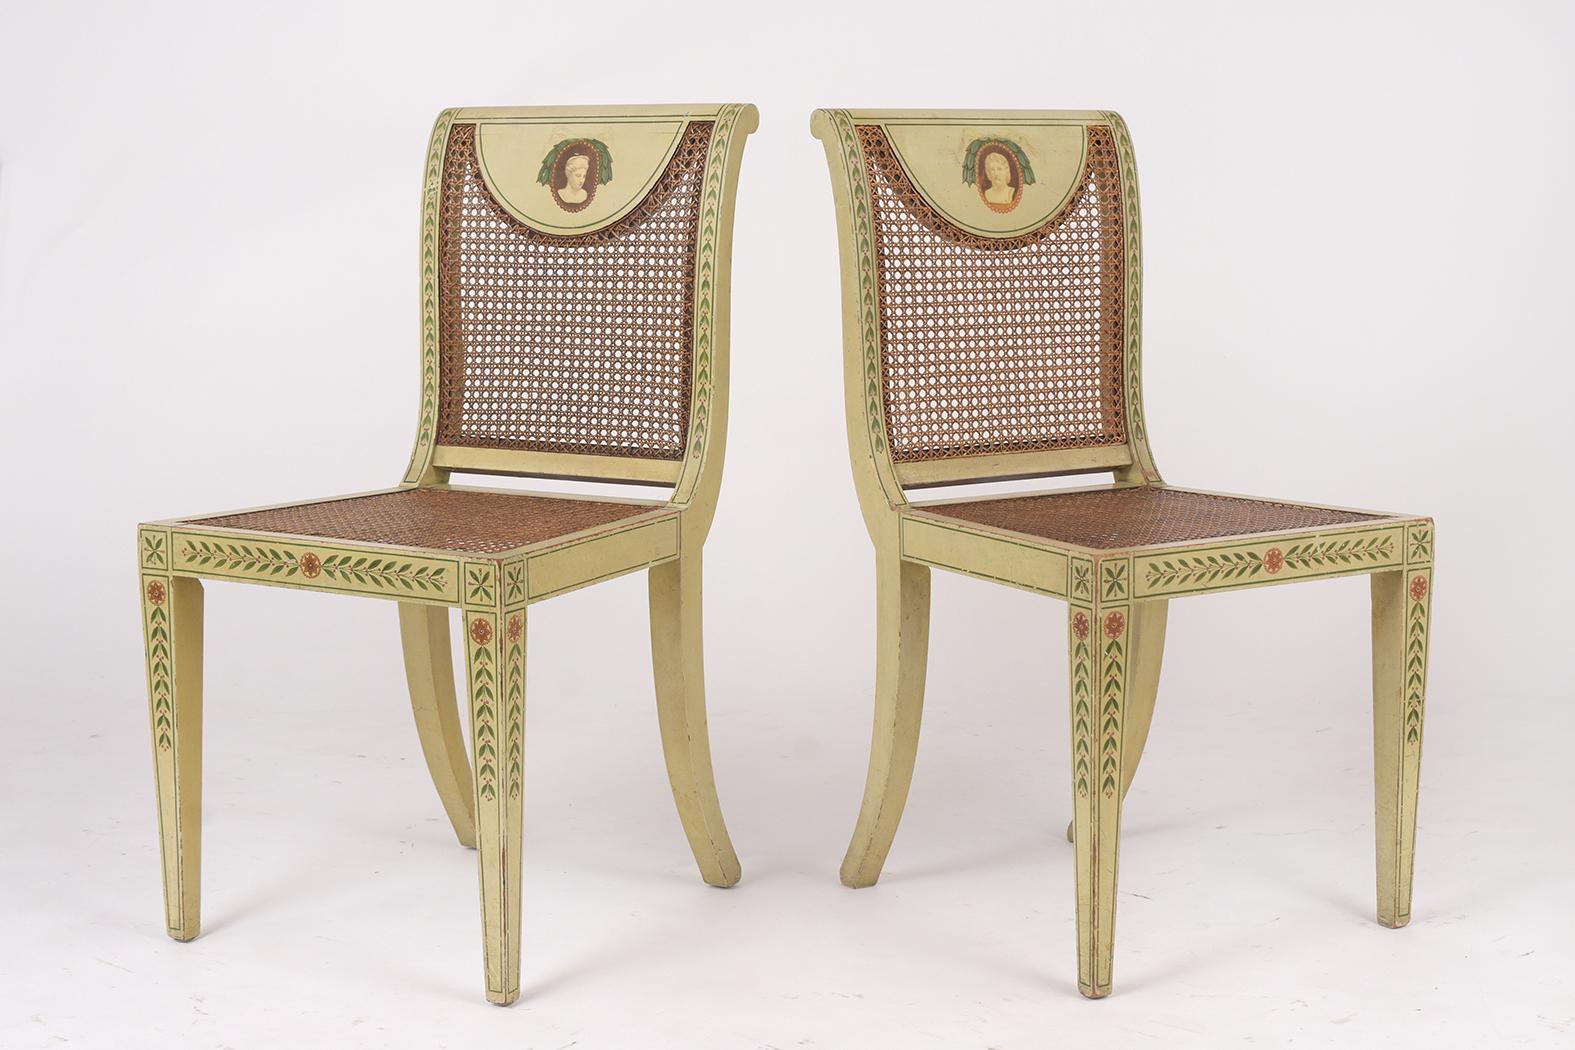 edwardian chairs styles